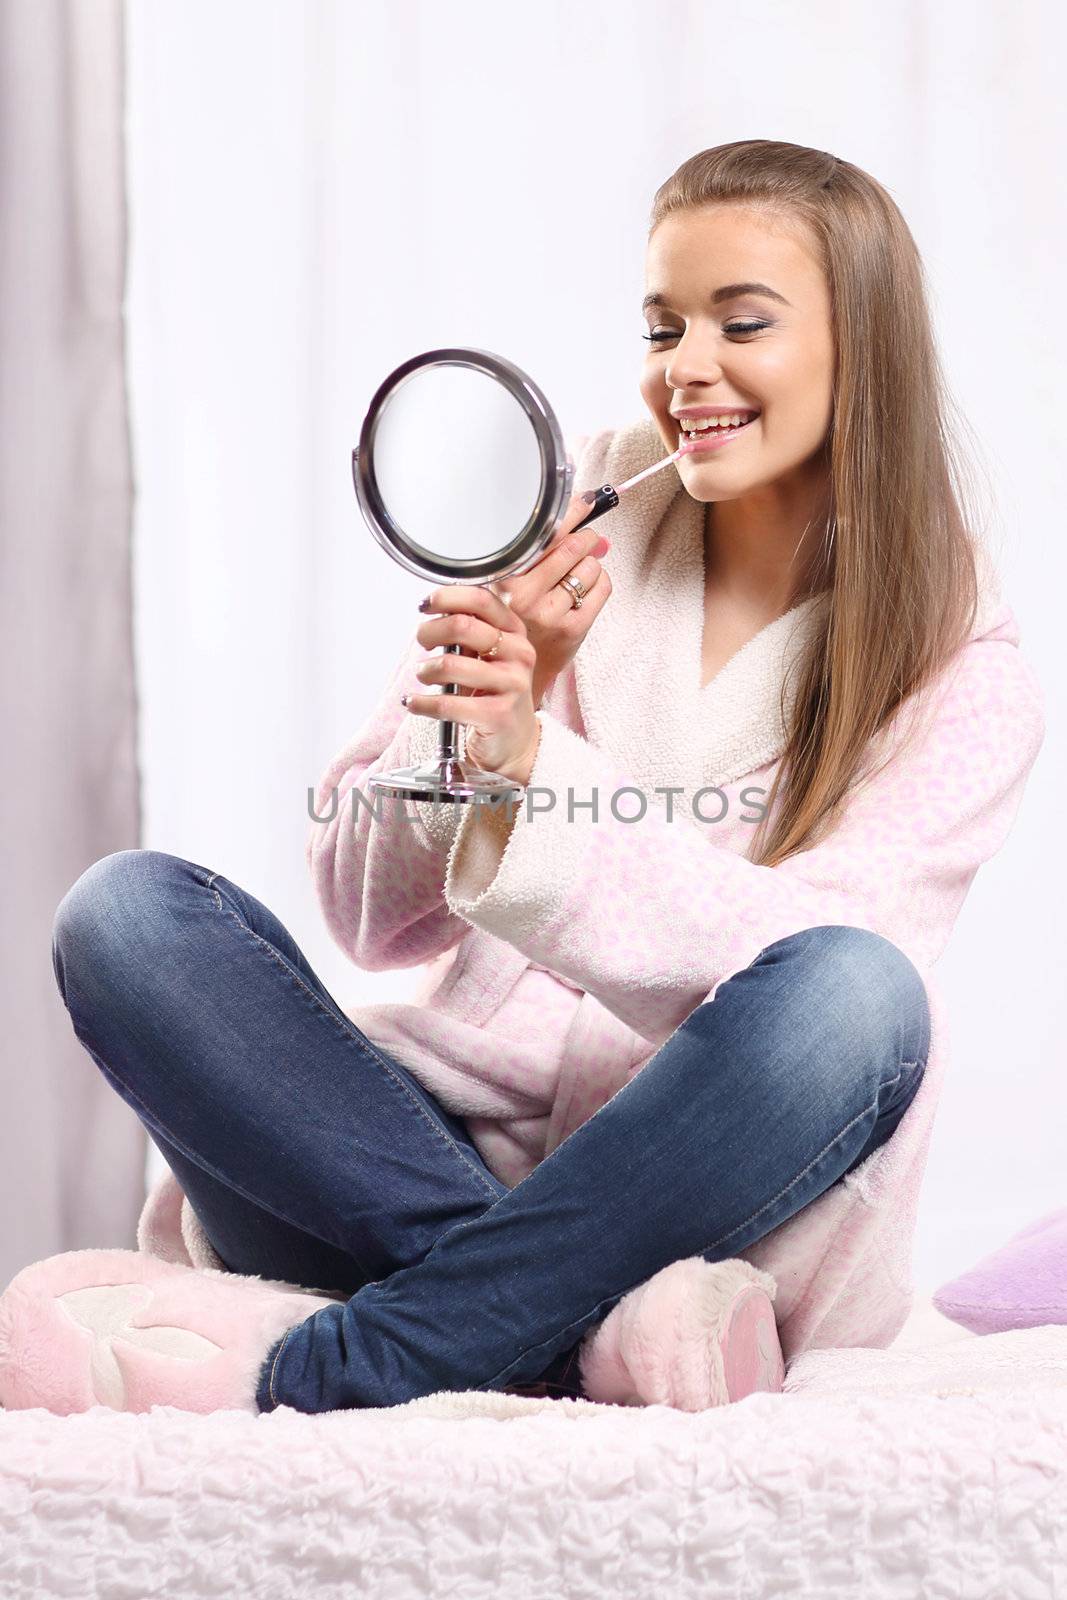 Girl sitting on the bed and holding a mirror by robert_przybysz